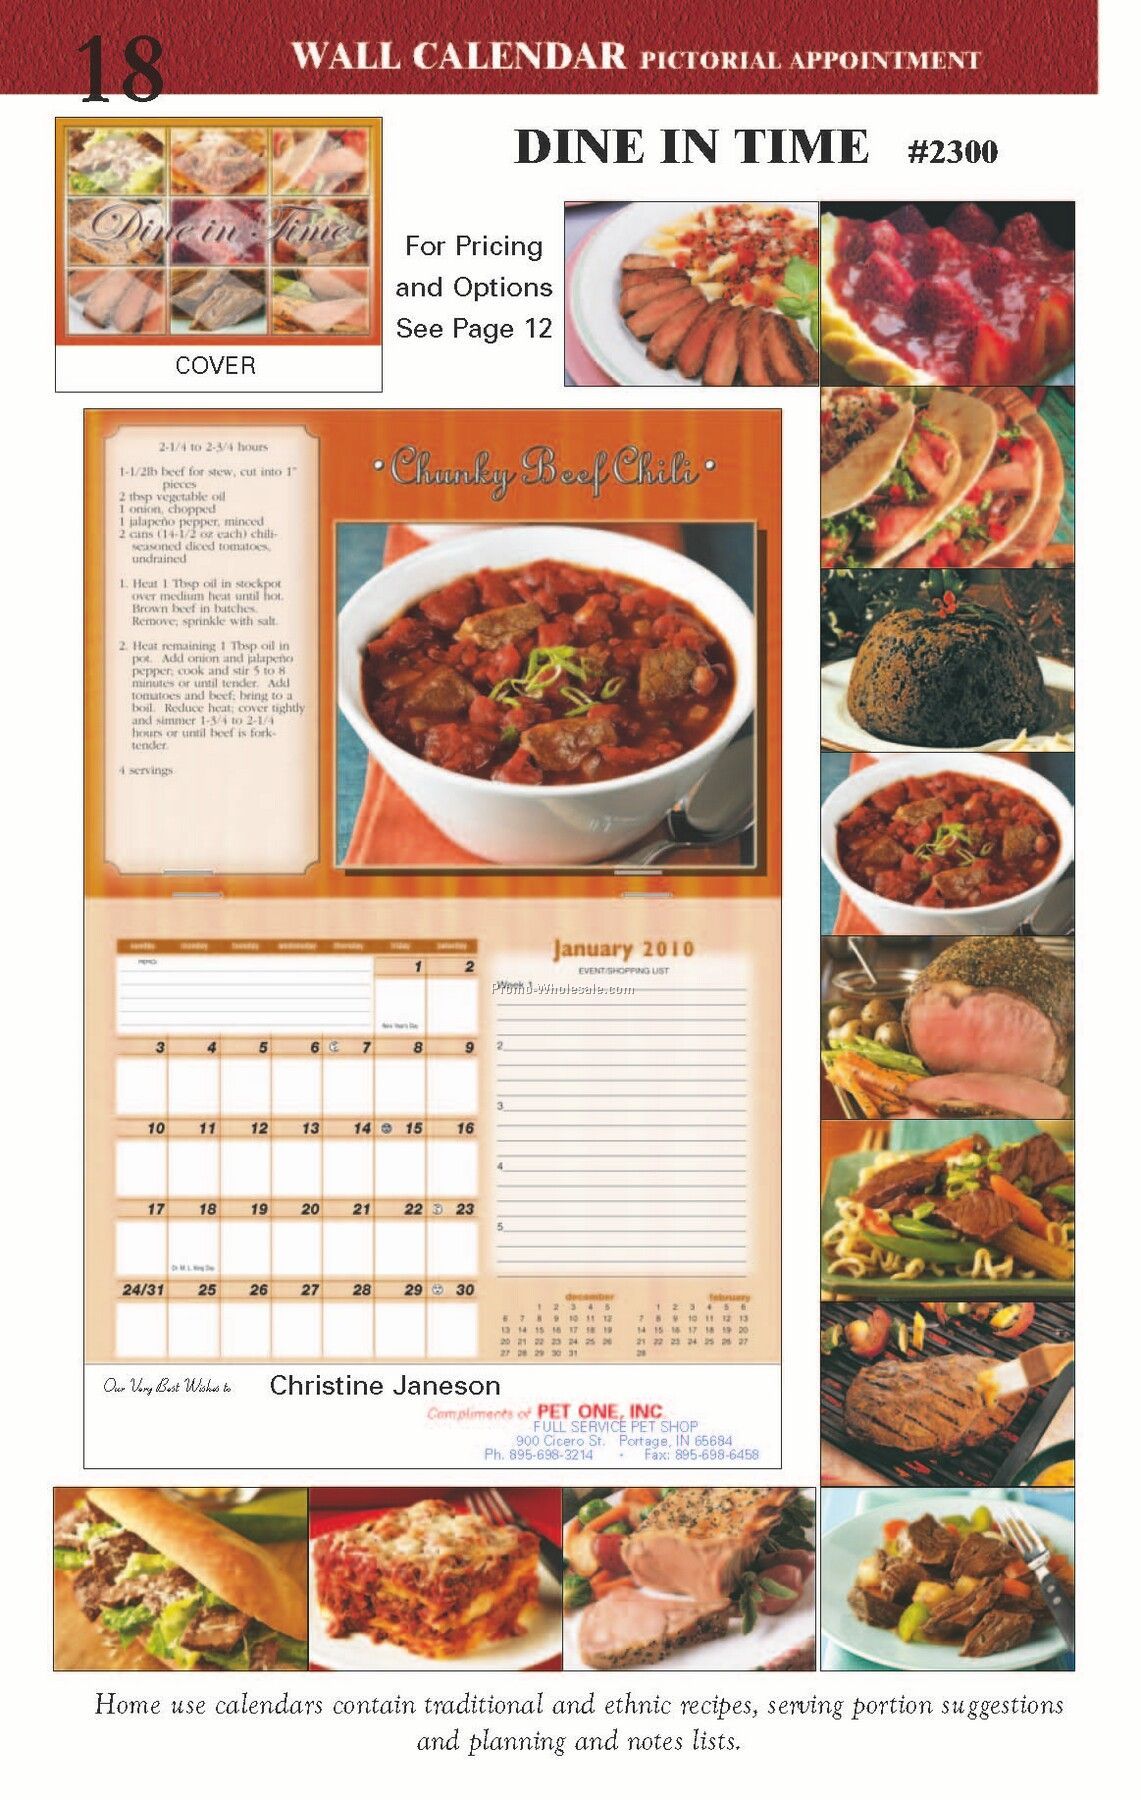 Executive Pictorial Wall Calendar: Dine In Time - Saddle Stitched